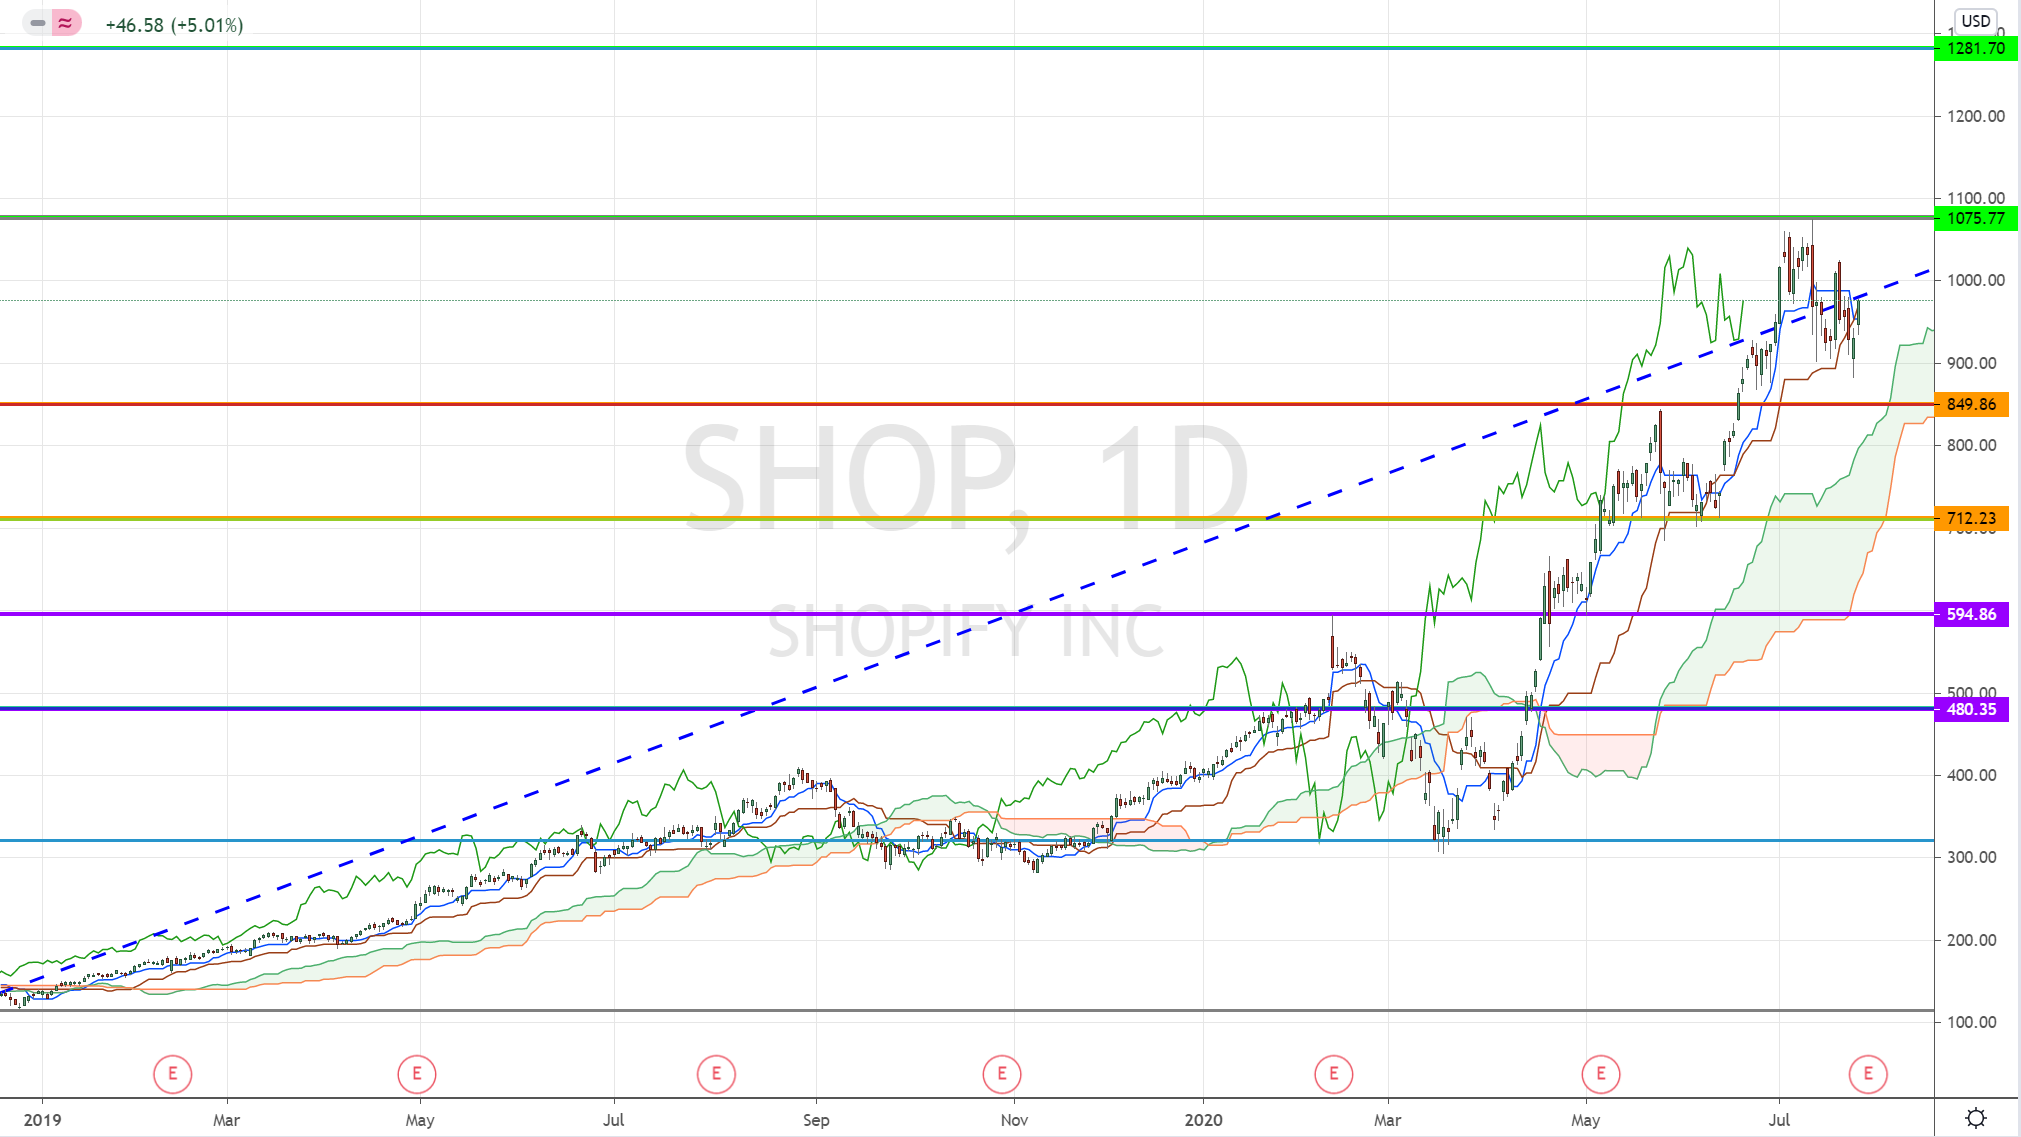 Shopify Stock Technical Analysis- Daily Chart